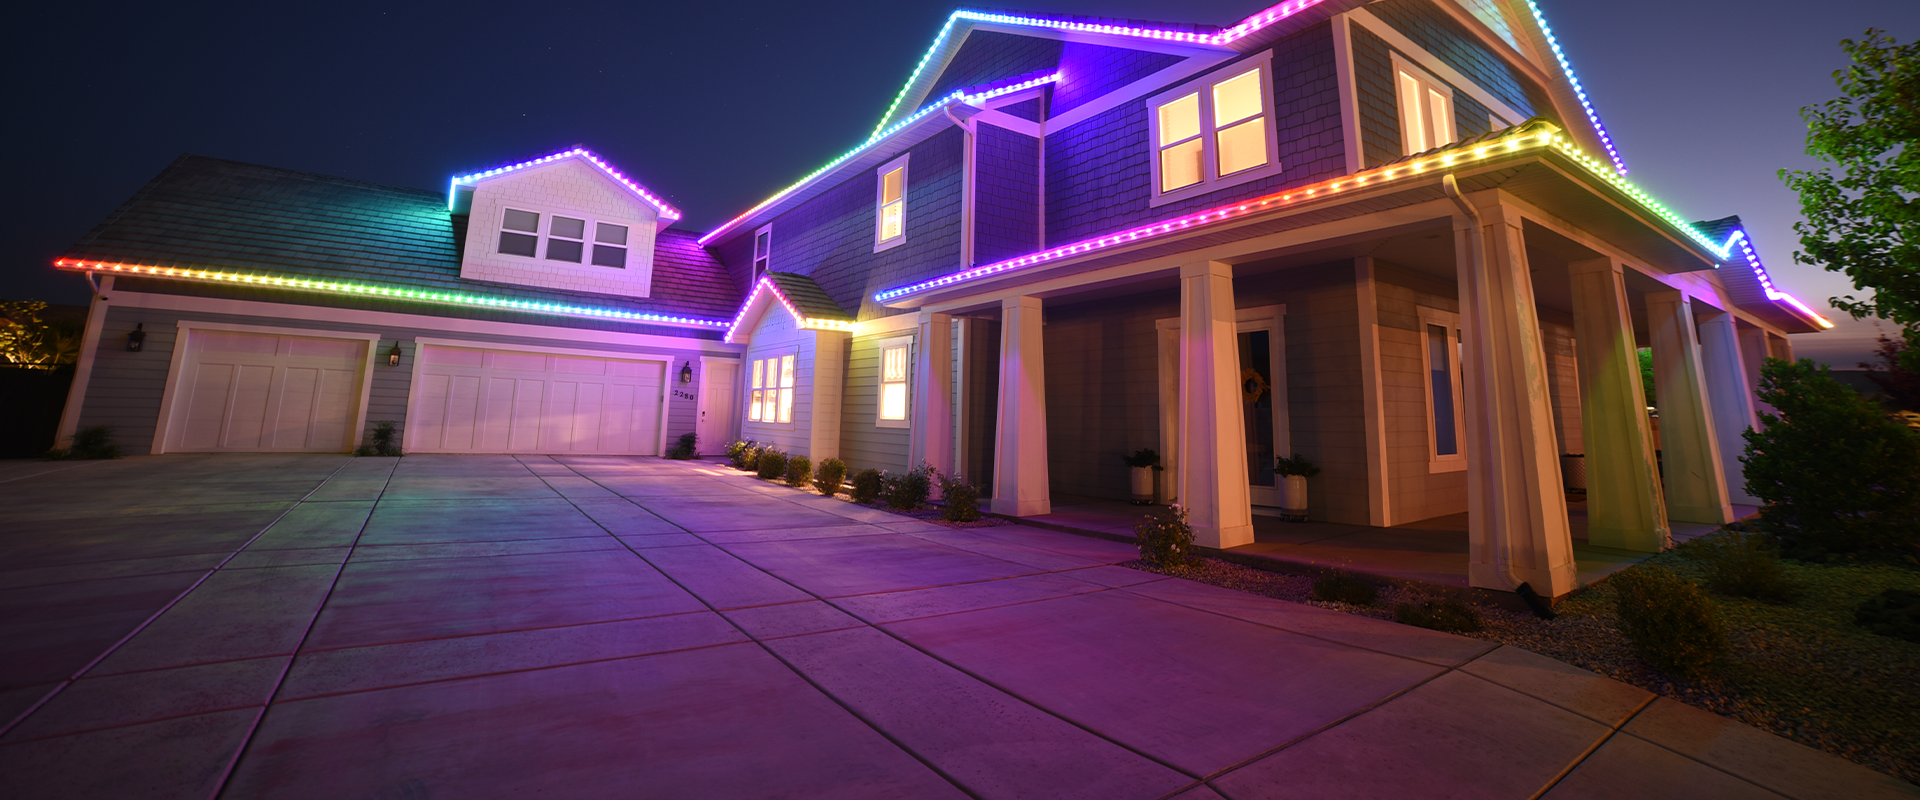 residential home image with permanent lighting